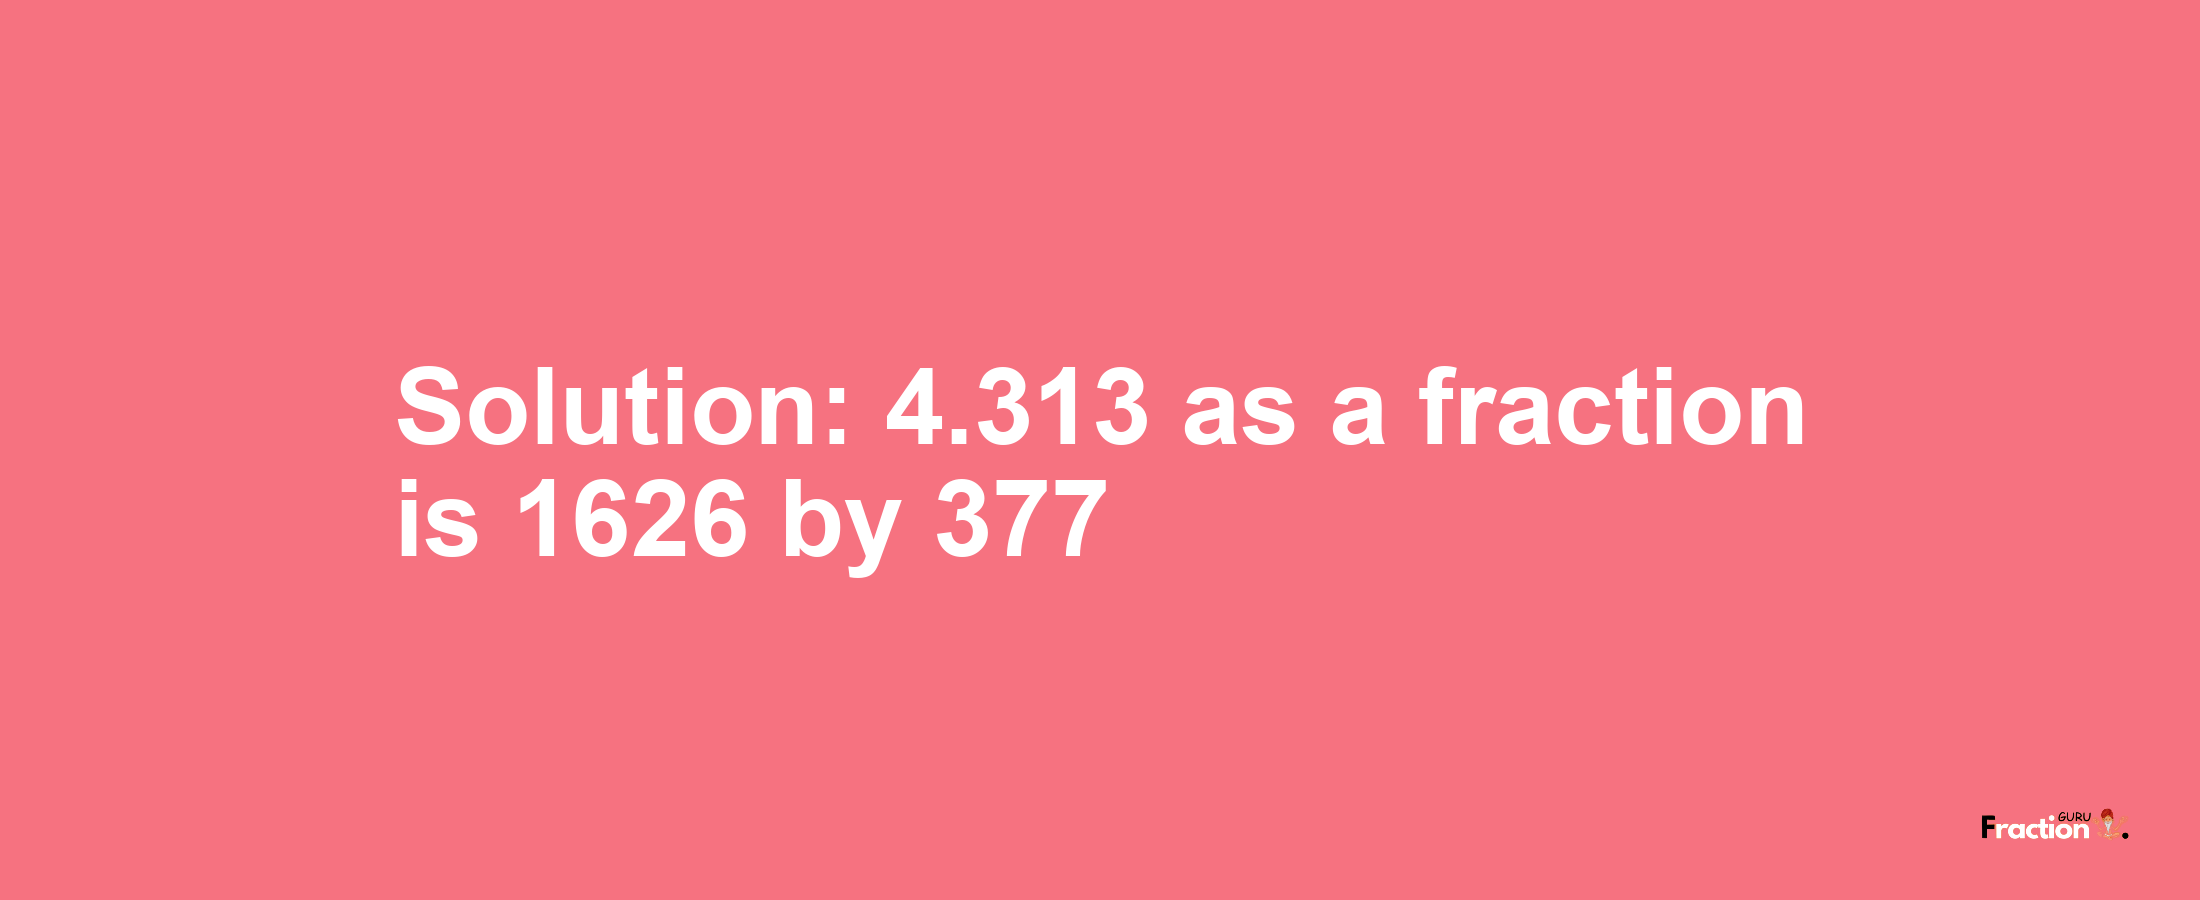 Solution:4.313 as a fraction is 1626/377